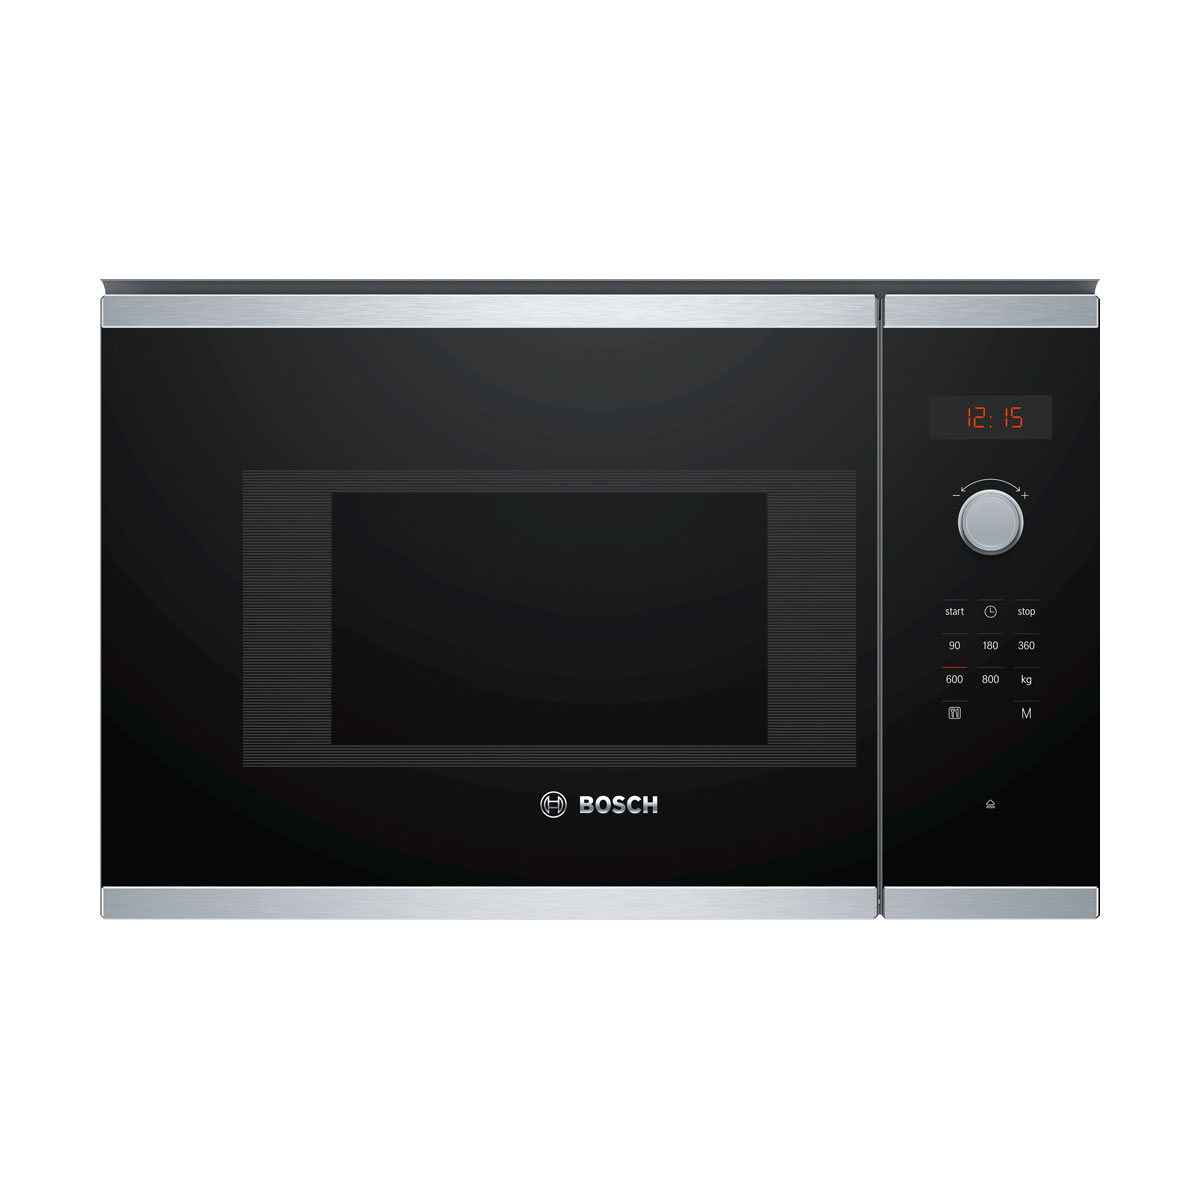 An image of Bosch BFL523MS0B Built In Microwave Oven - Stainless Steel